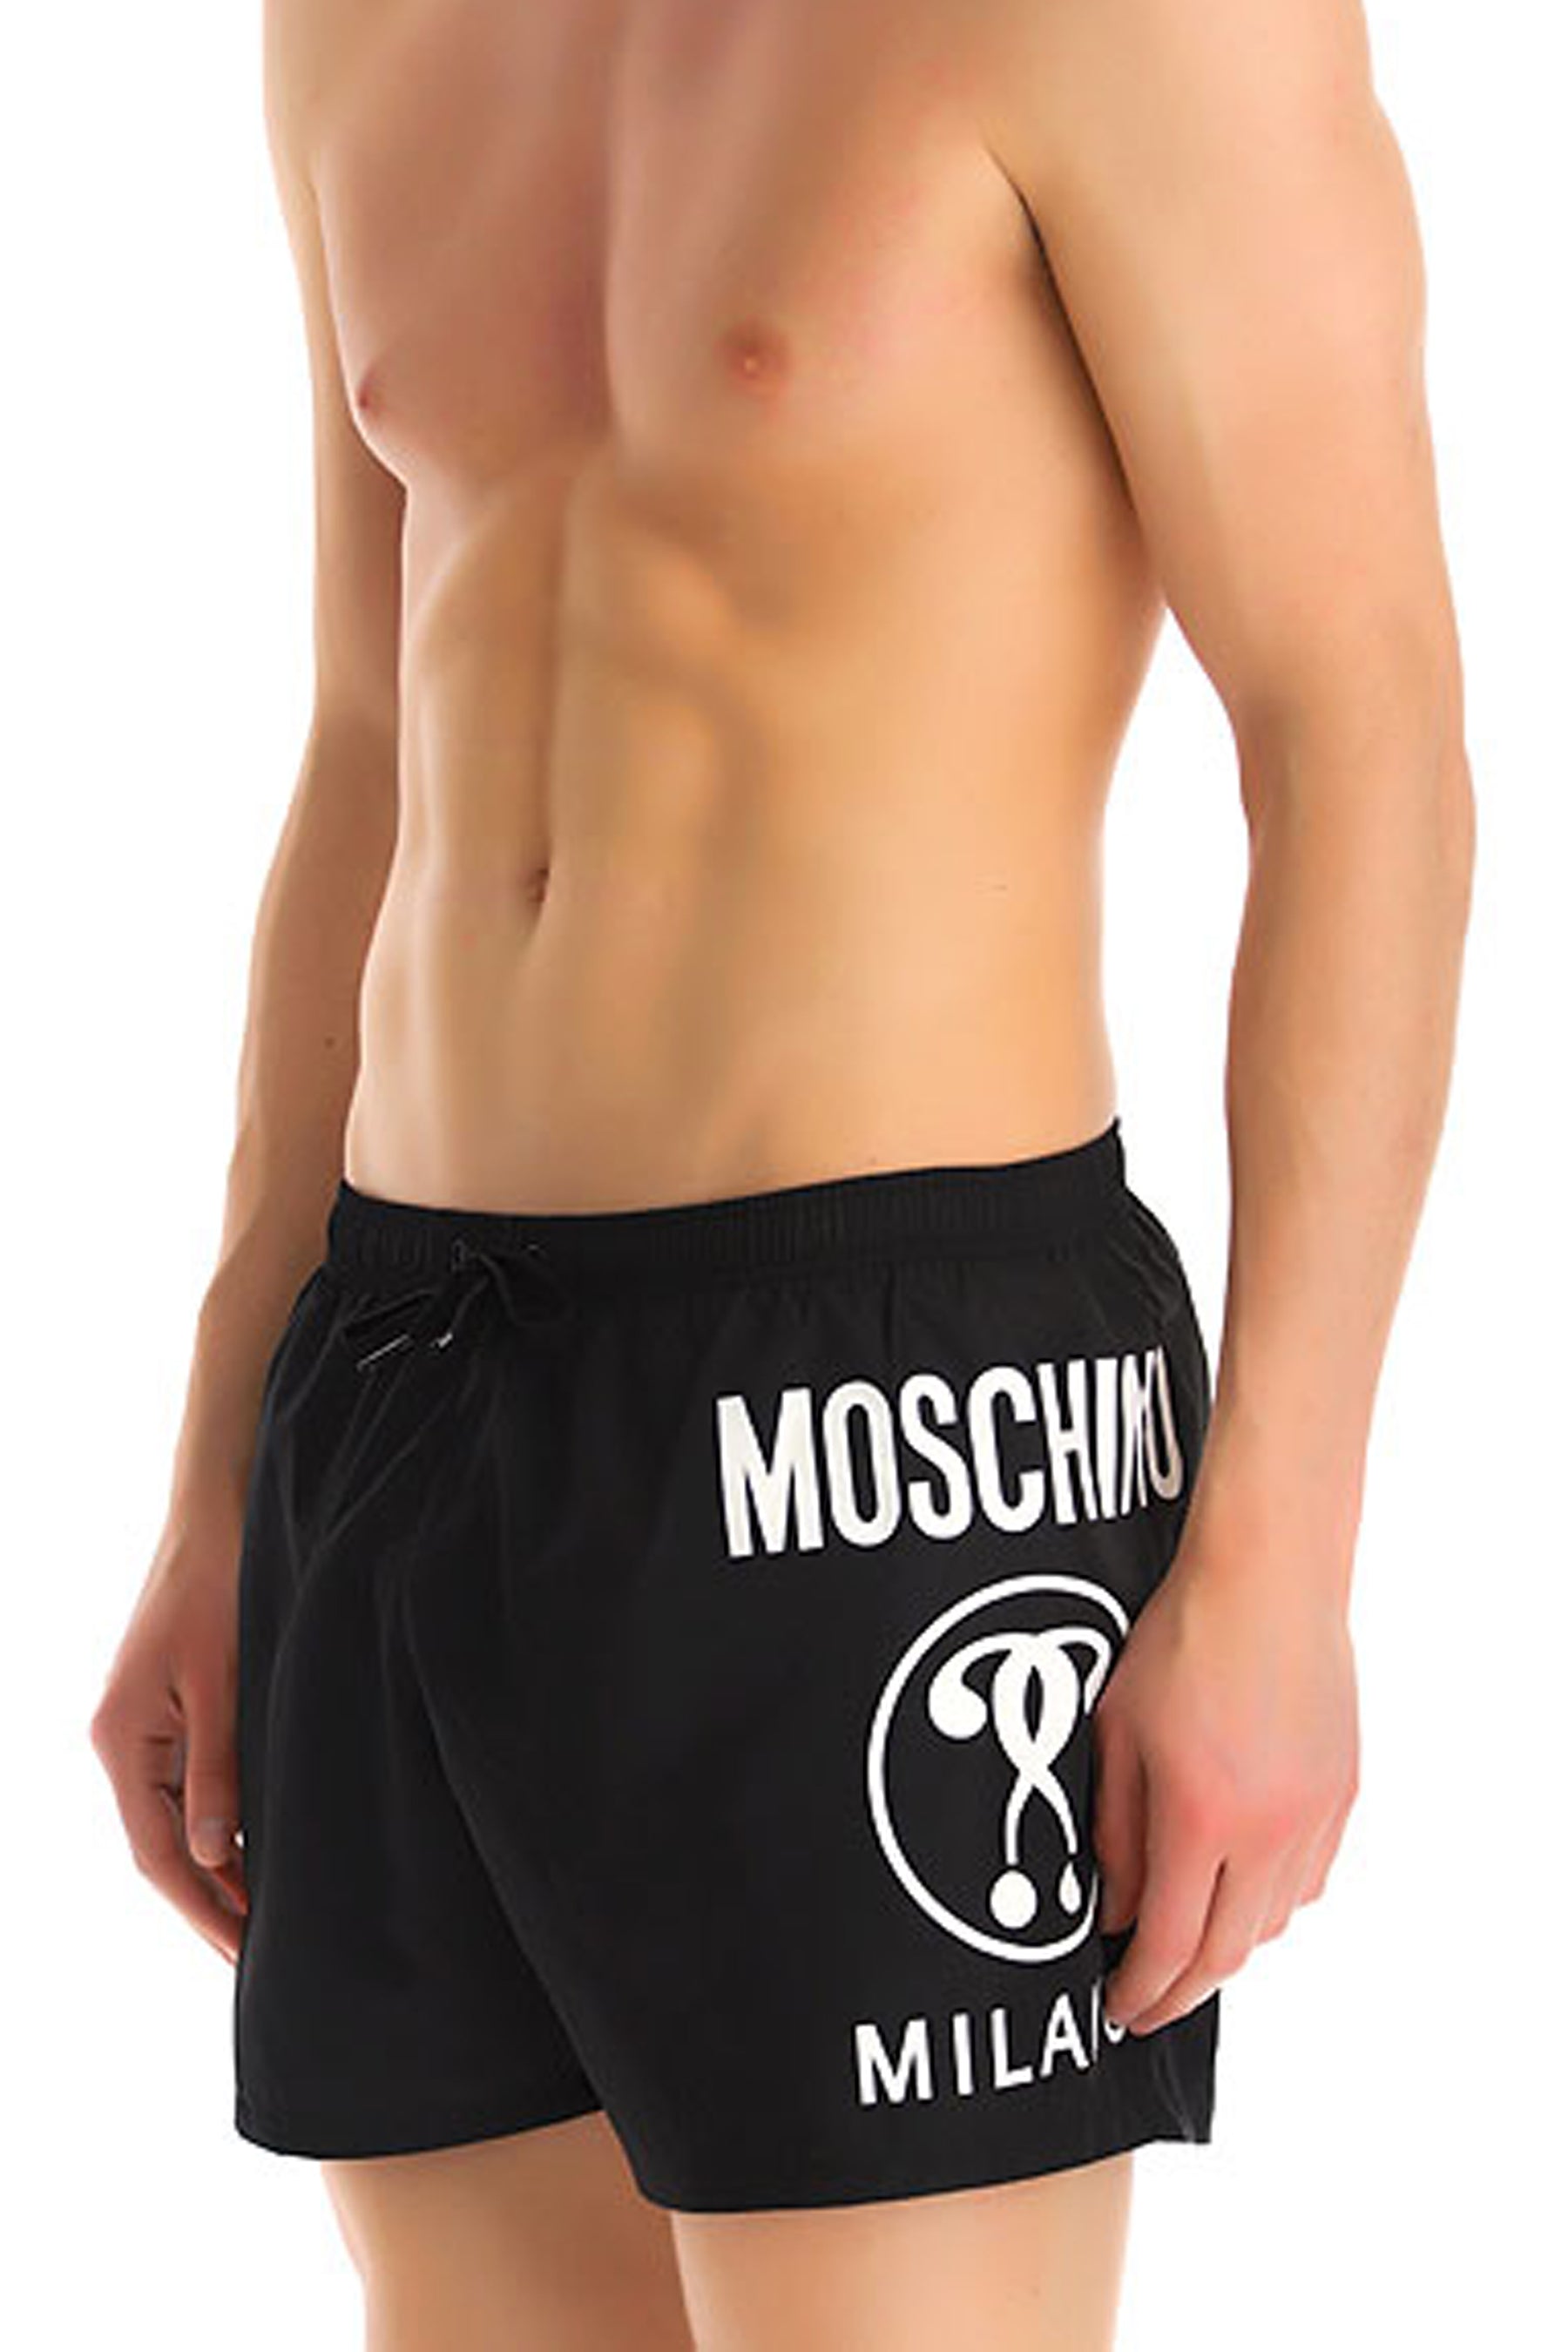 Moschino double question mark swimming shorts